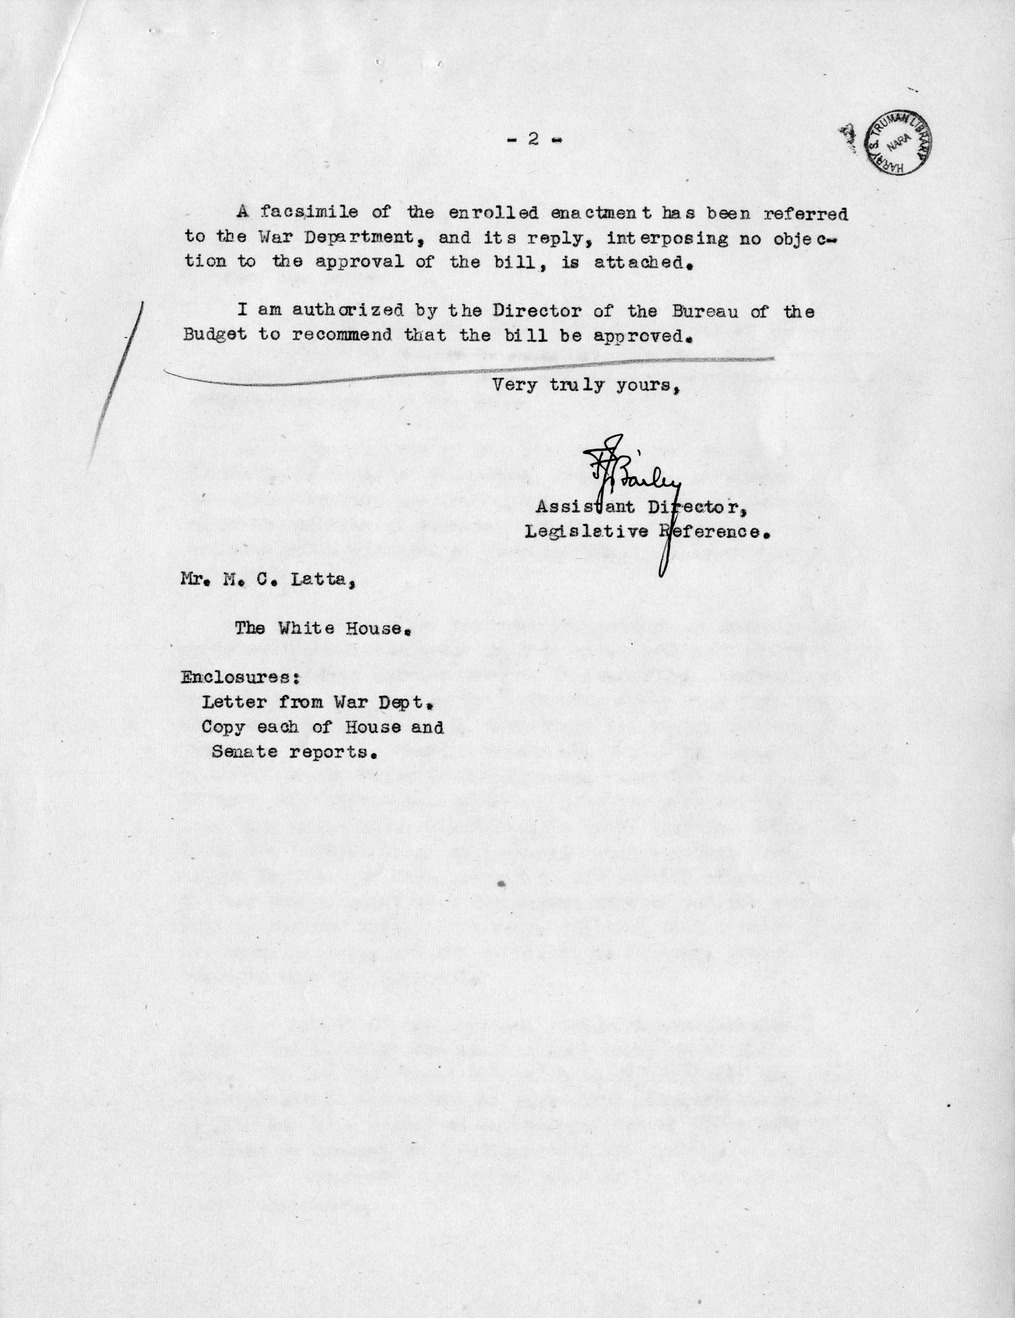 Memorandum from Frederick J. Bailey to M. C. Latta, S. 1129, For the Relief of Willie H. Johnson, with Attachments